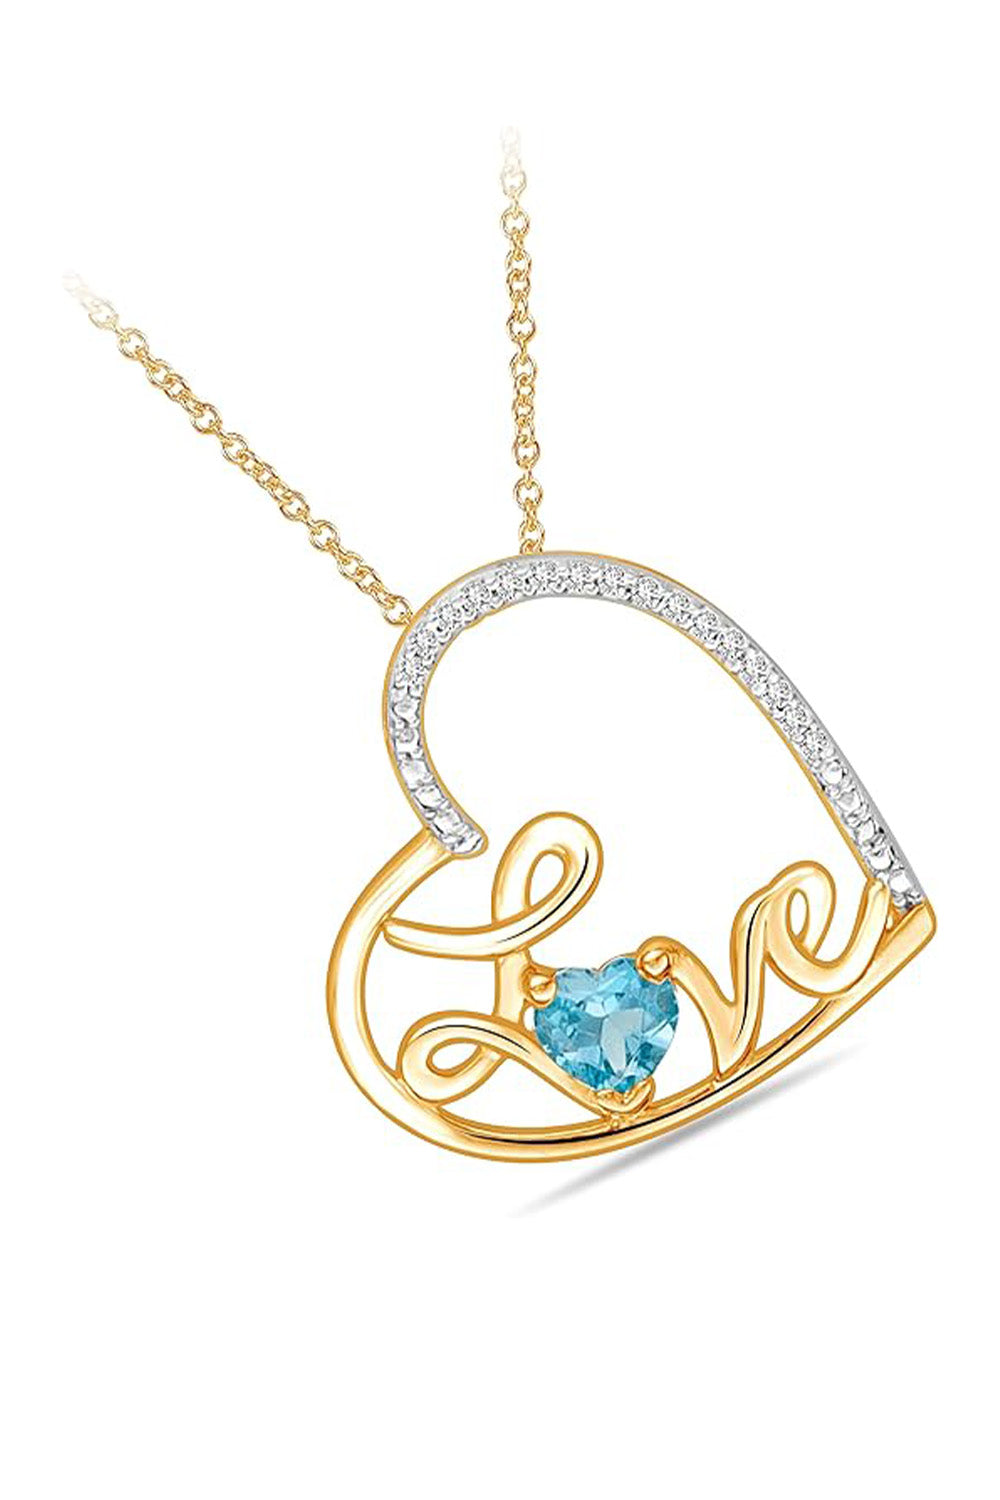 Yellow Gold Color Blue Topaz Gemstone Love Heart Pendant Necklace